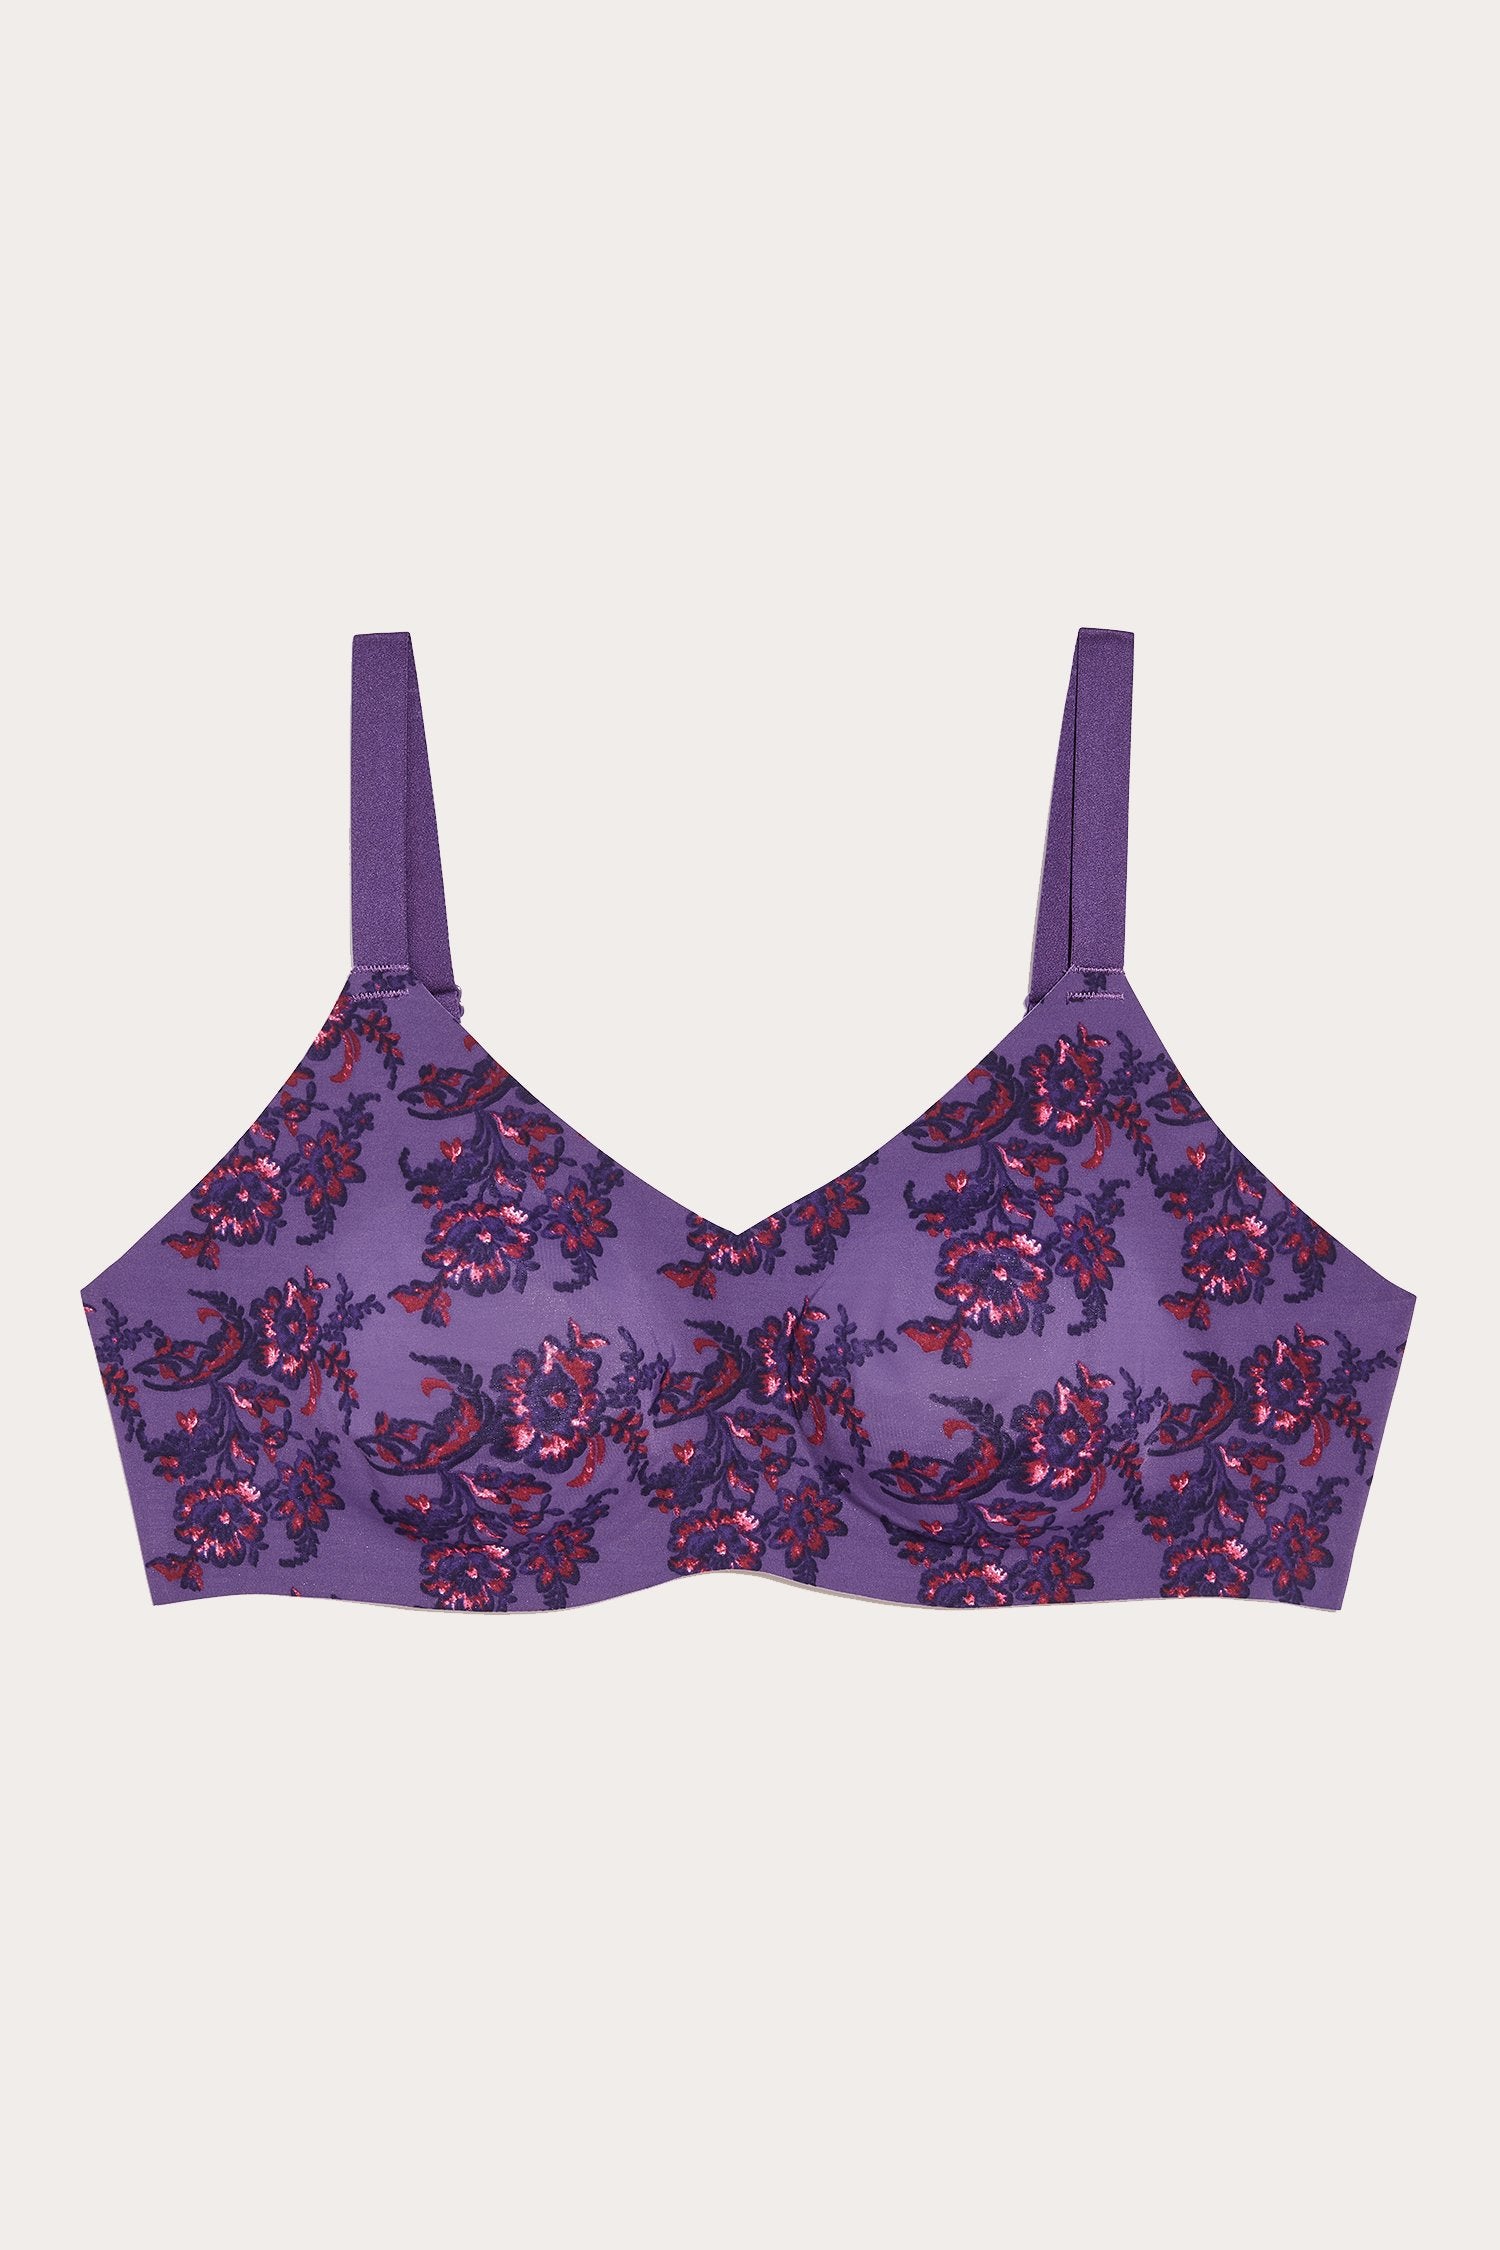 Anna Sui x Knix Autumn Evenings Luxe V-Neck Padded Bra inspiration from the psychedelic rock posters from the 60’s